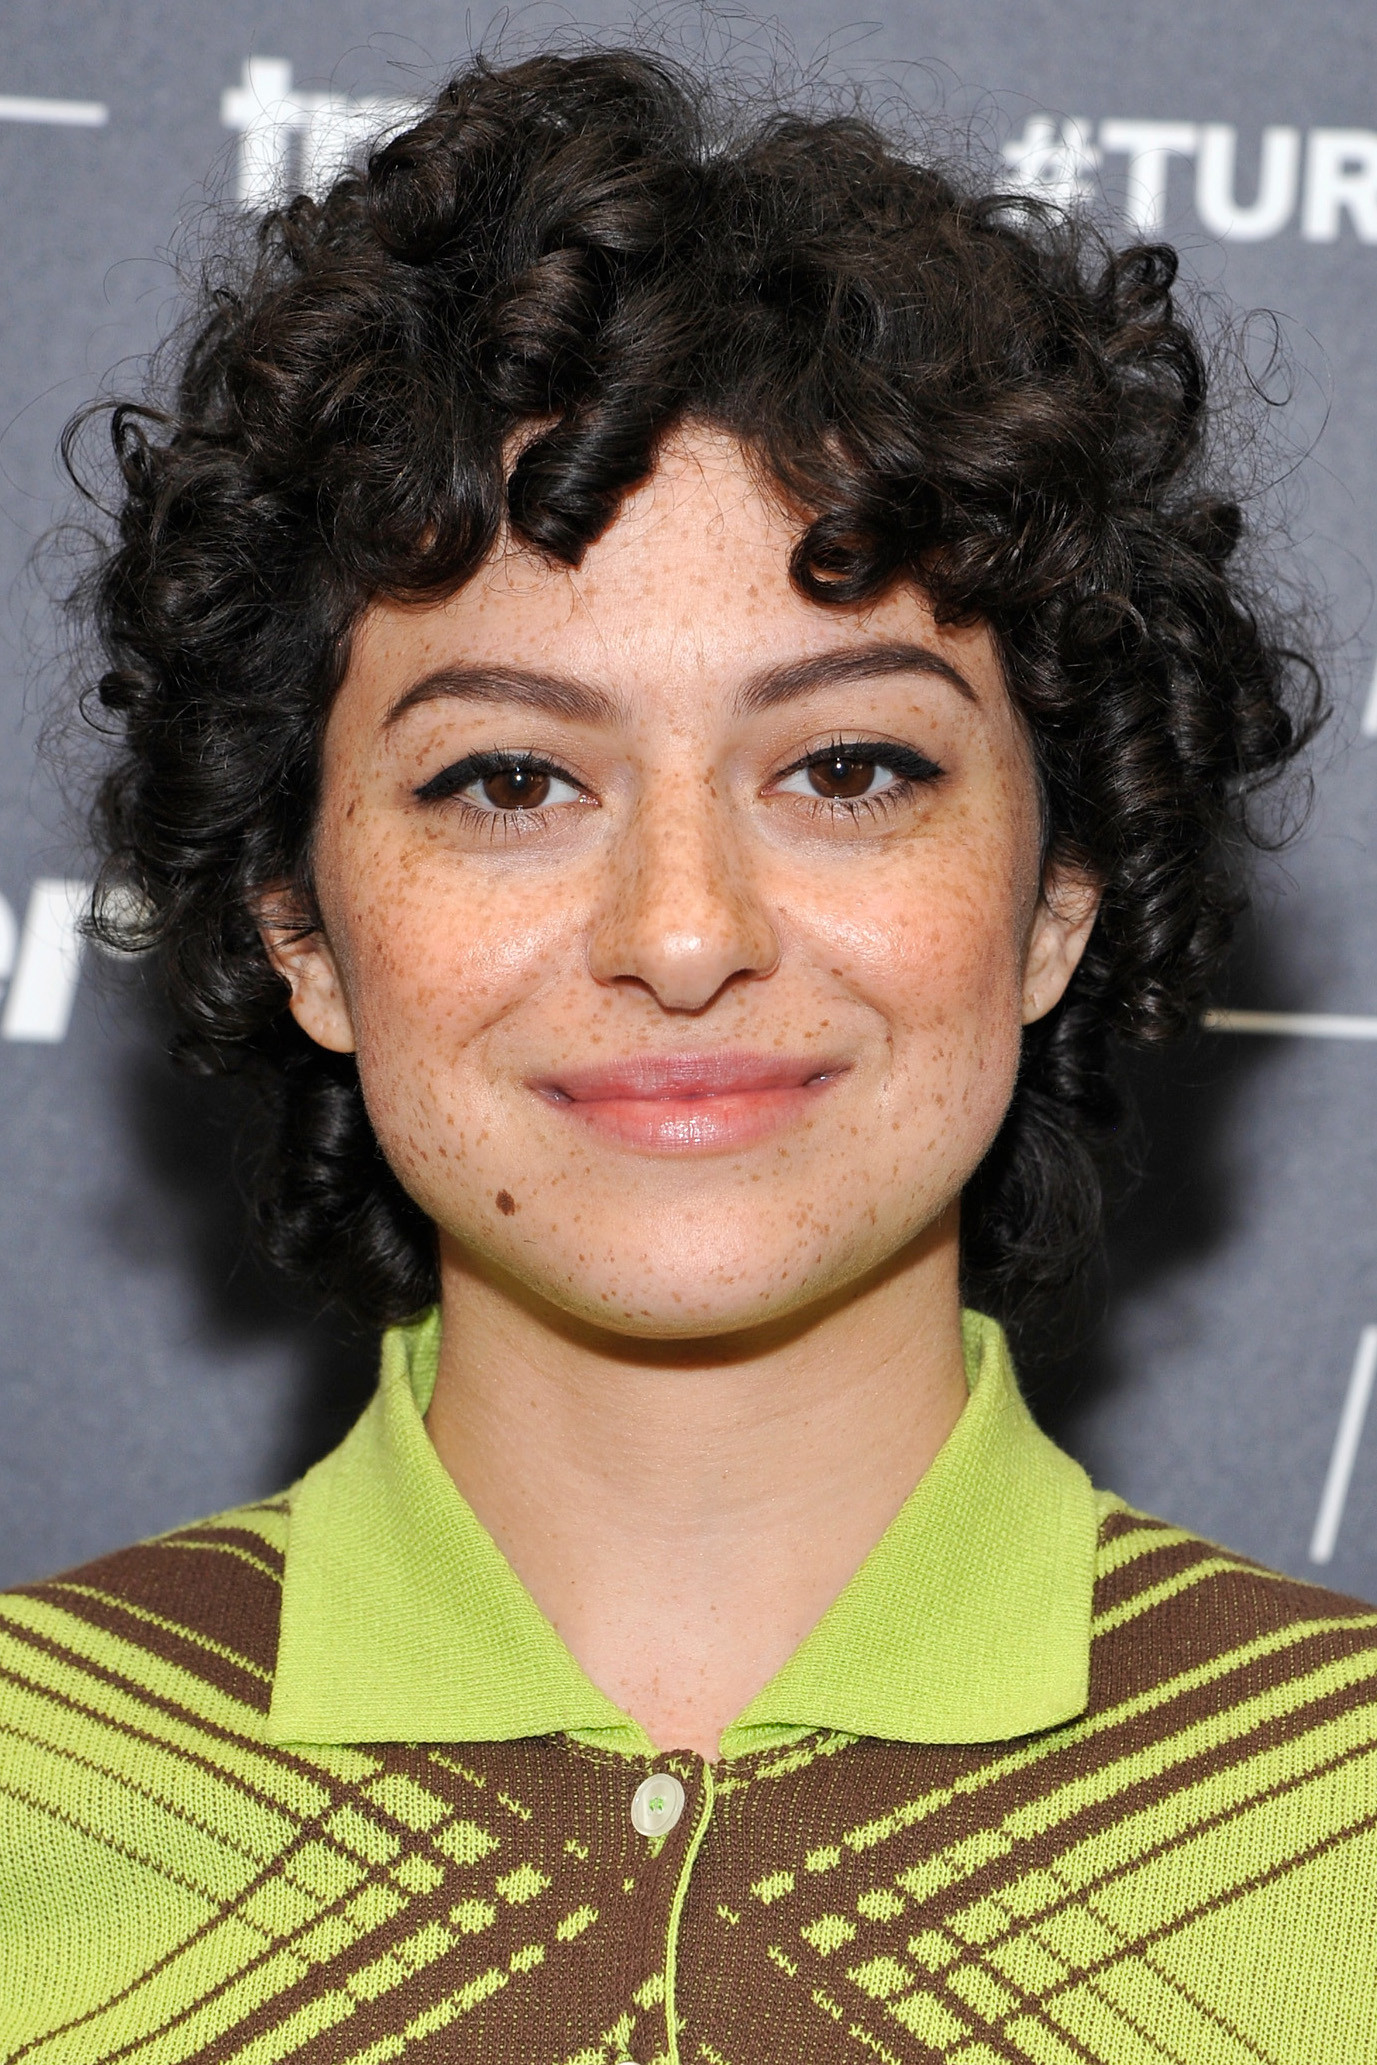 Hairstyles For People With Short Hair
 15 Celebrity Short Curly Hair Ideas Short Haircuts and